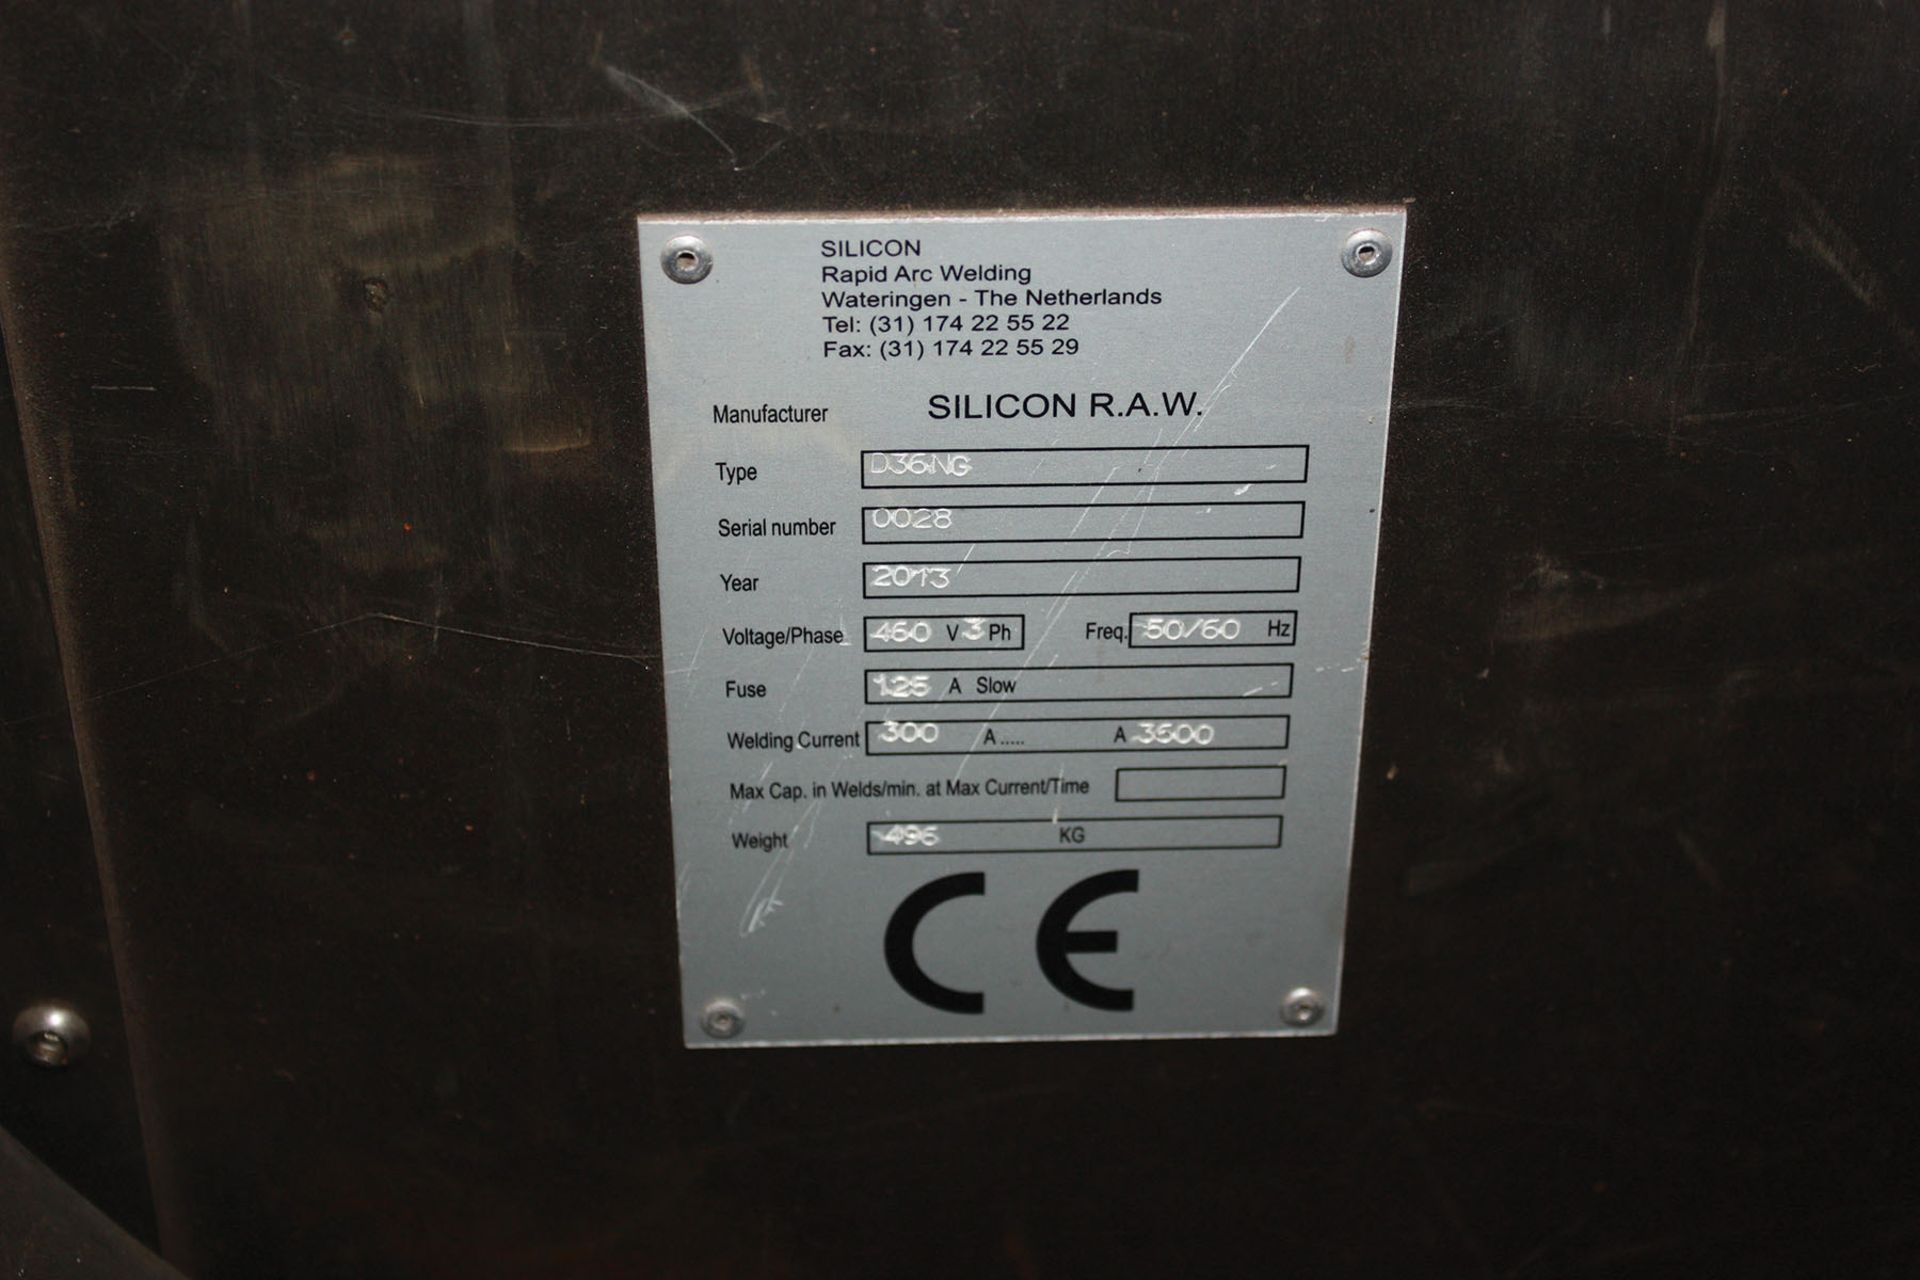 2013 SILICON STUD WELDER, MDL: D36NG - Image 2 of 3